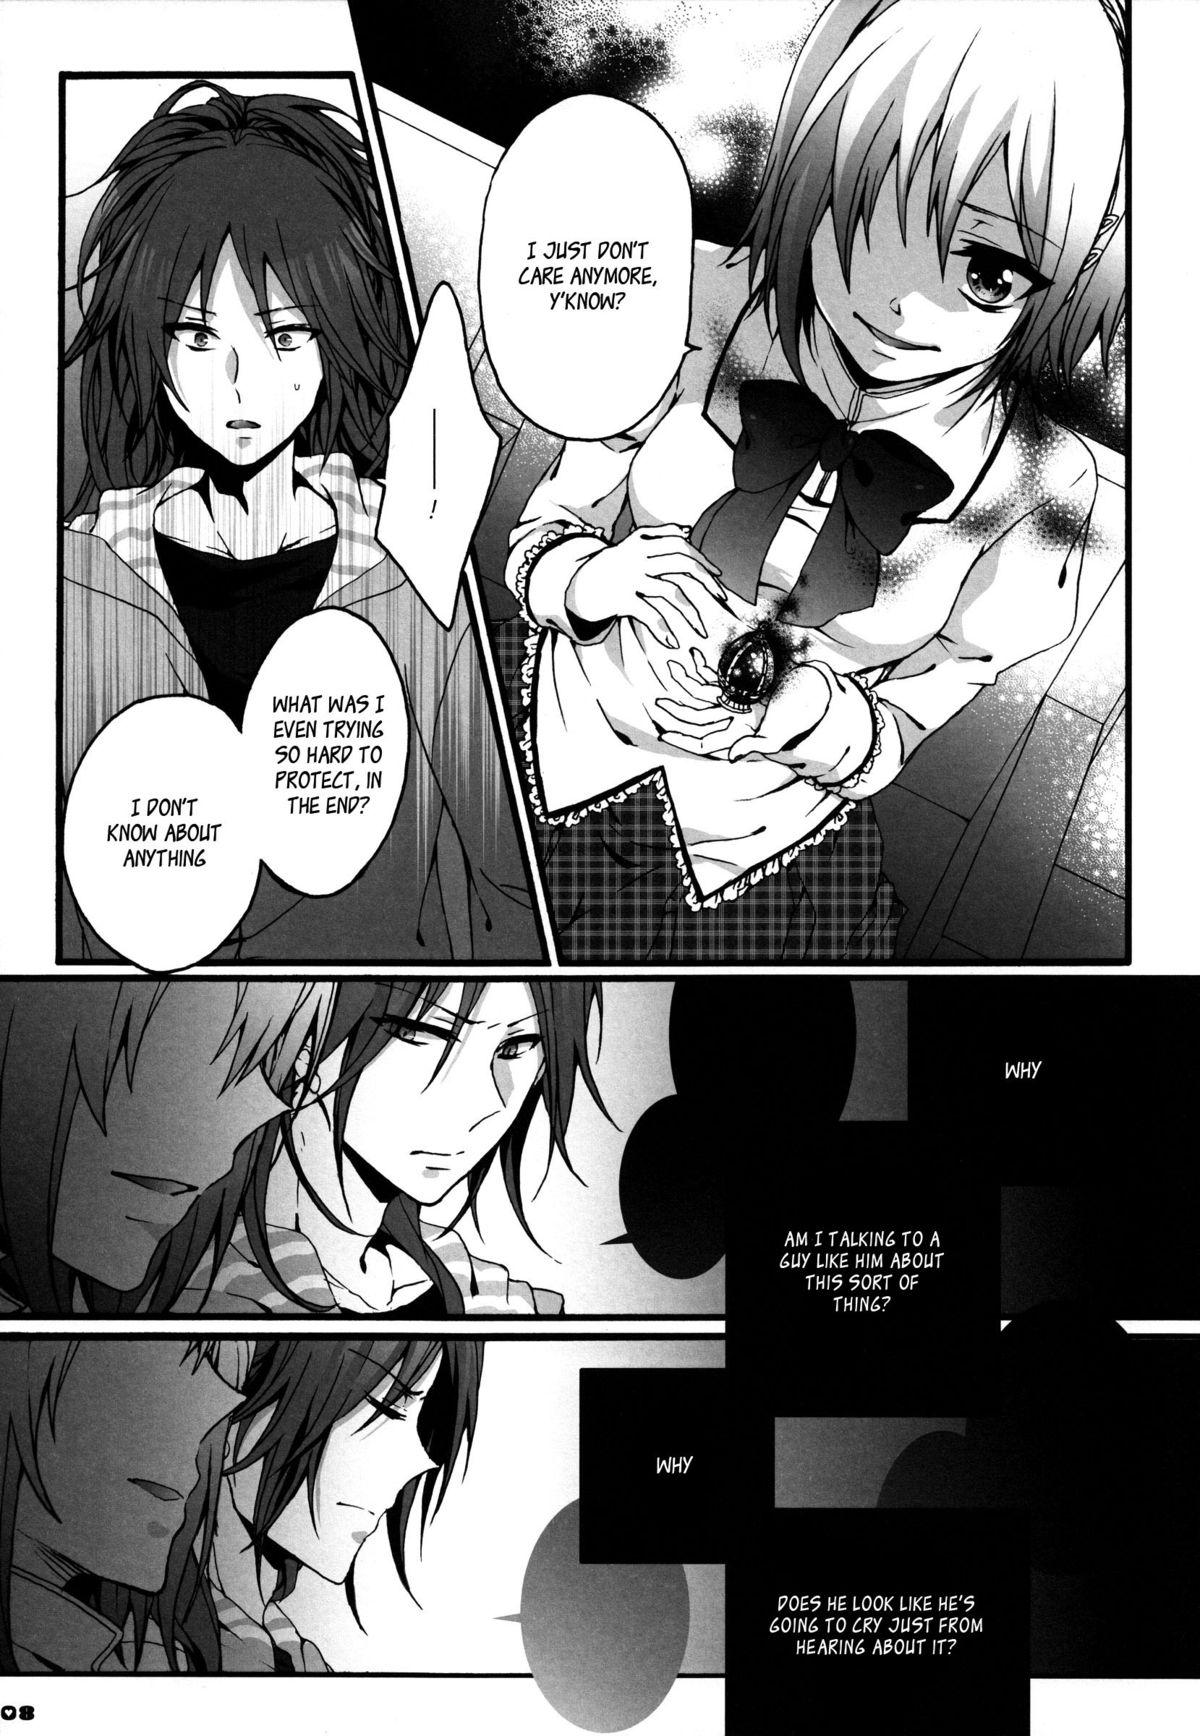 Athletic Bye Bye, Together - Puella magi madoka magica Clothed - Page 7